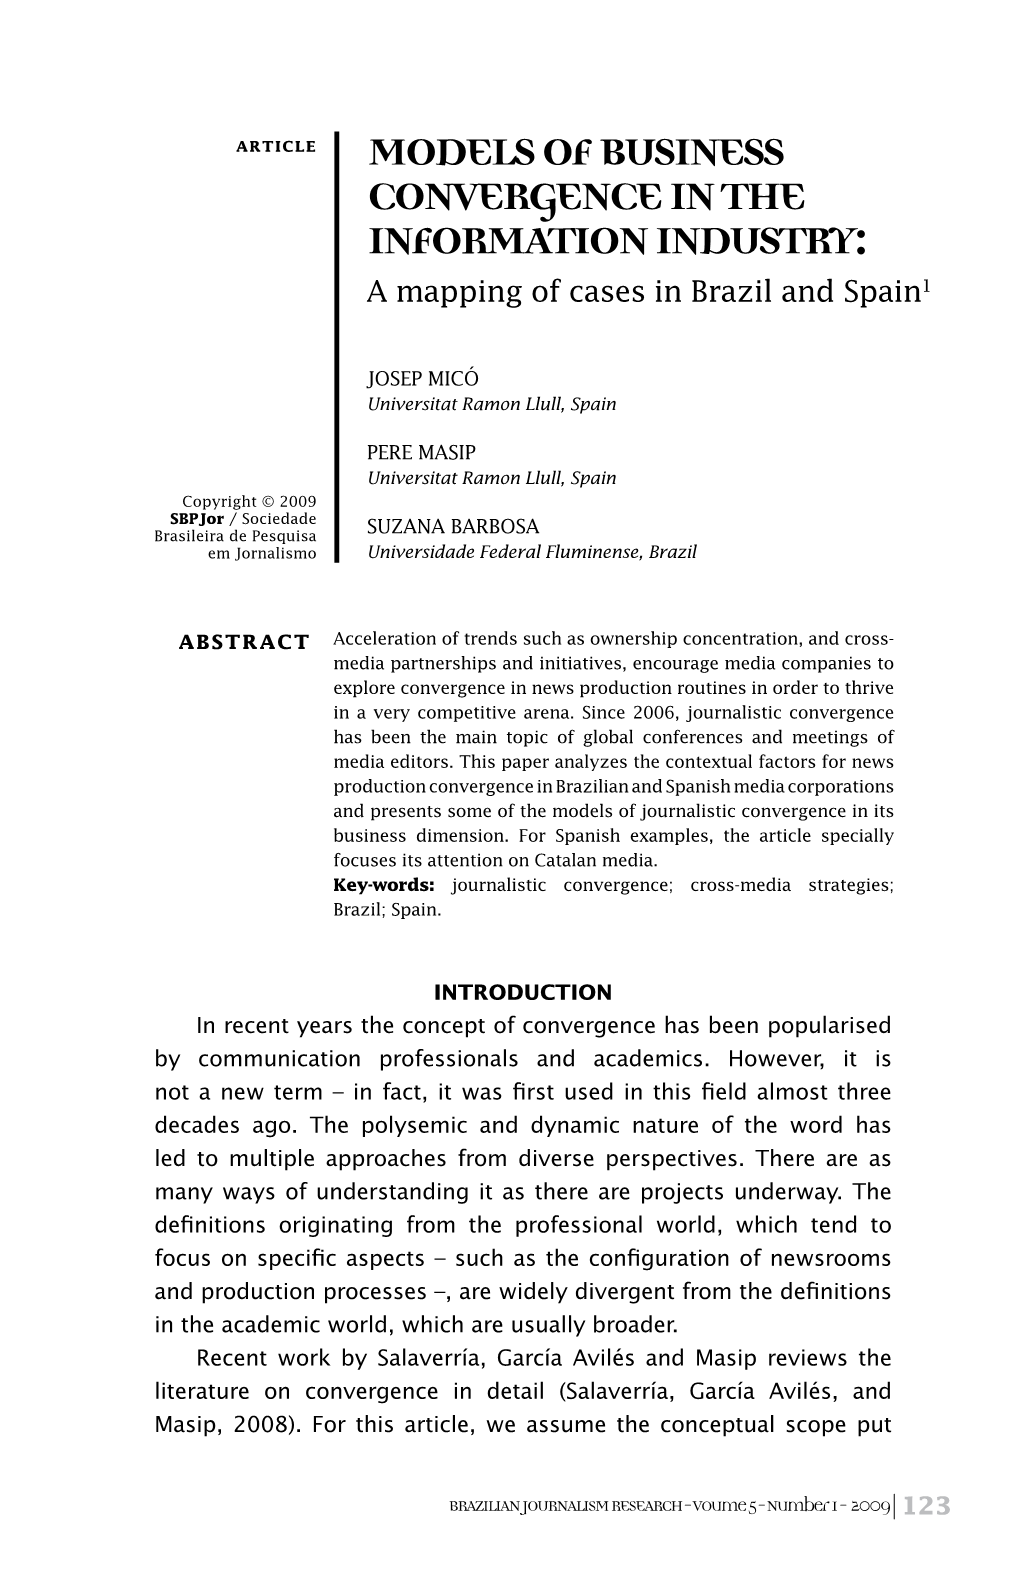 MODELS of BUSINESS CONVERGENCE in the INFORMATION INDUSTRY: a Mapping of Cases in Brazil and Spain1